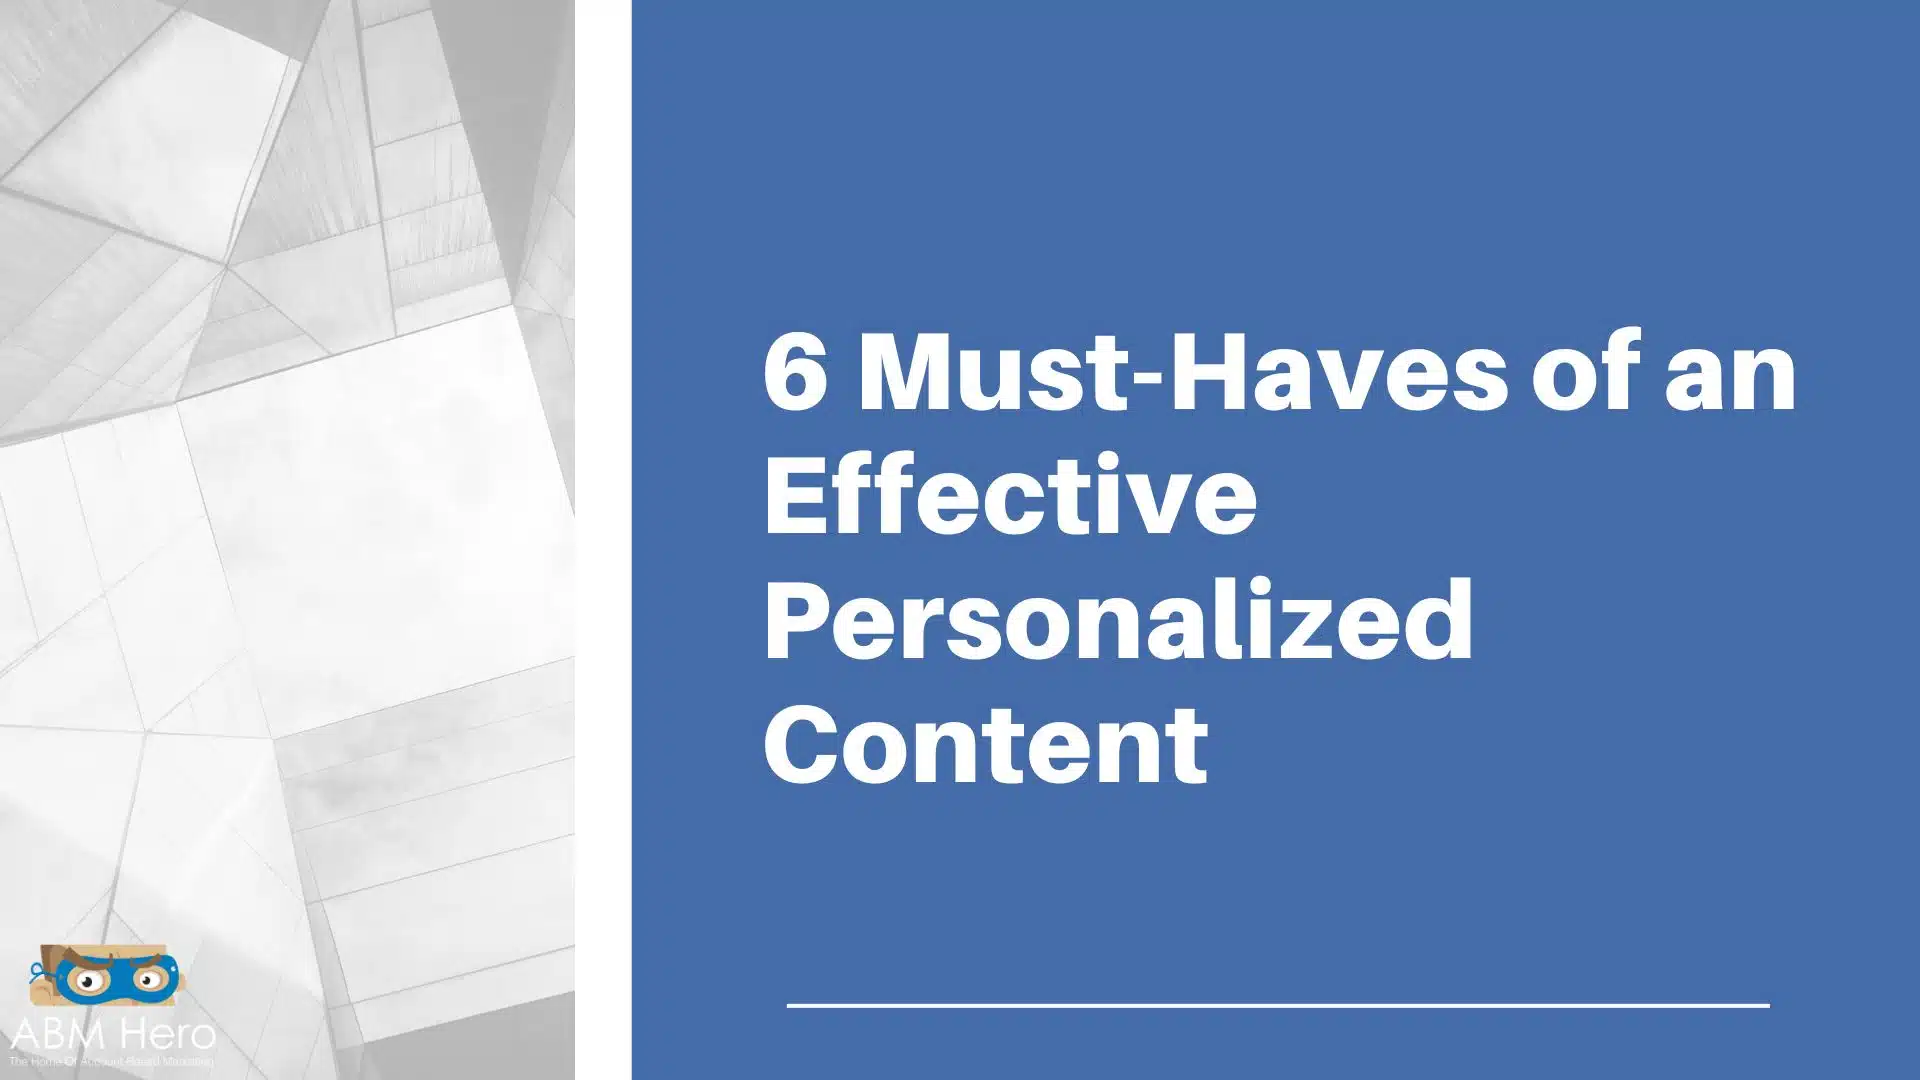 You are currently viewing 6 Must-Haves of an Effective Personalized Content